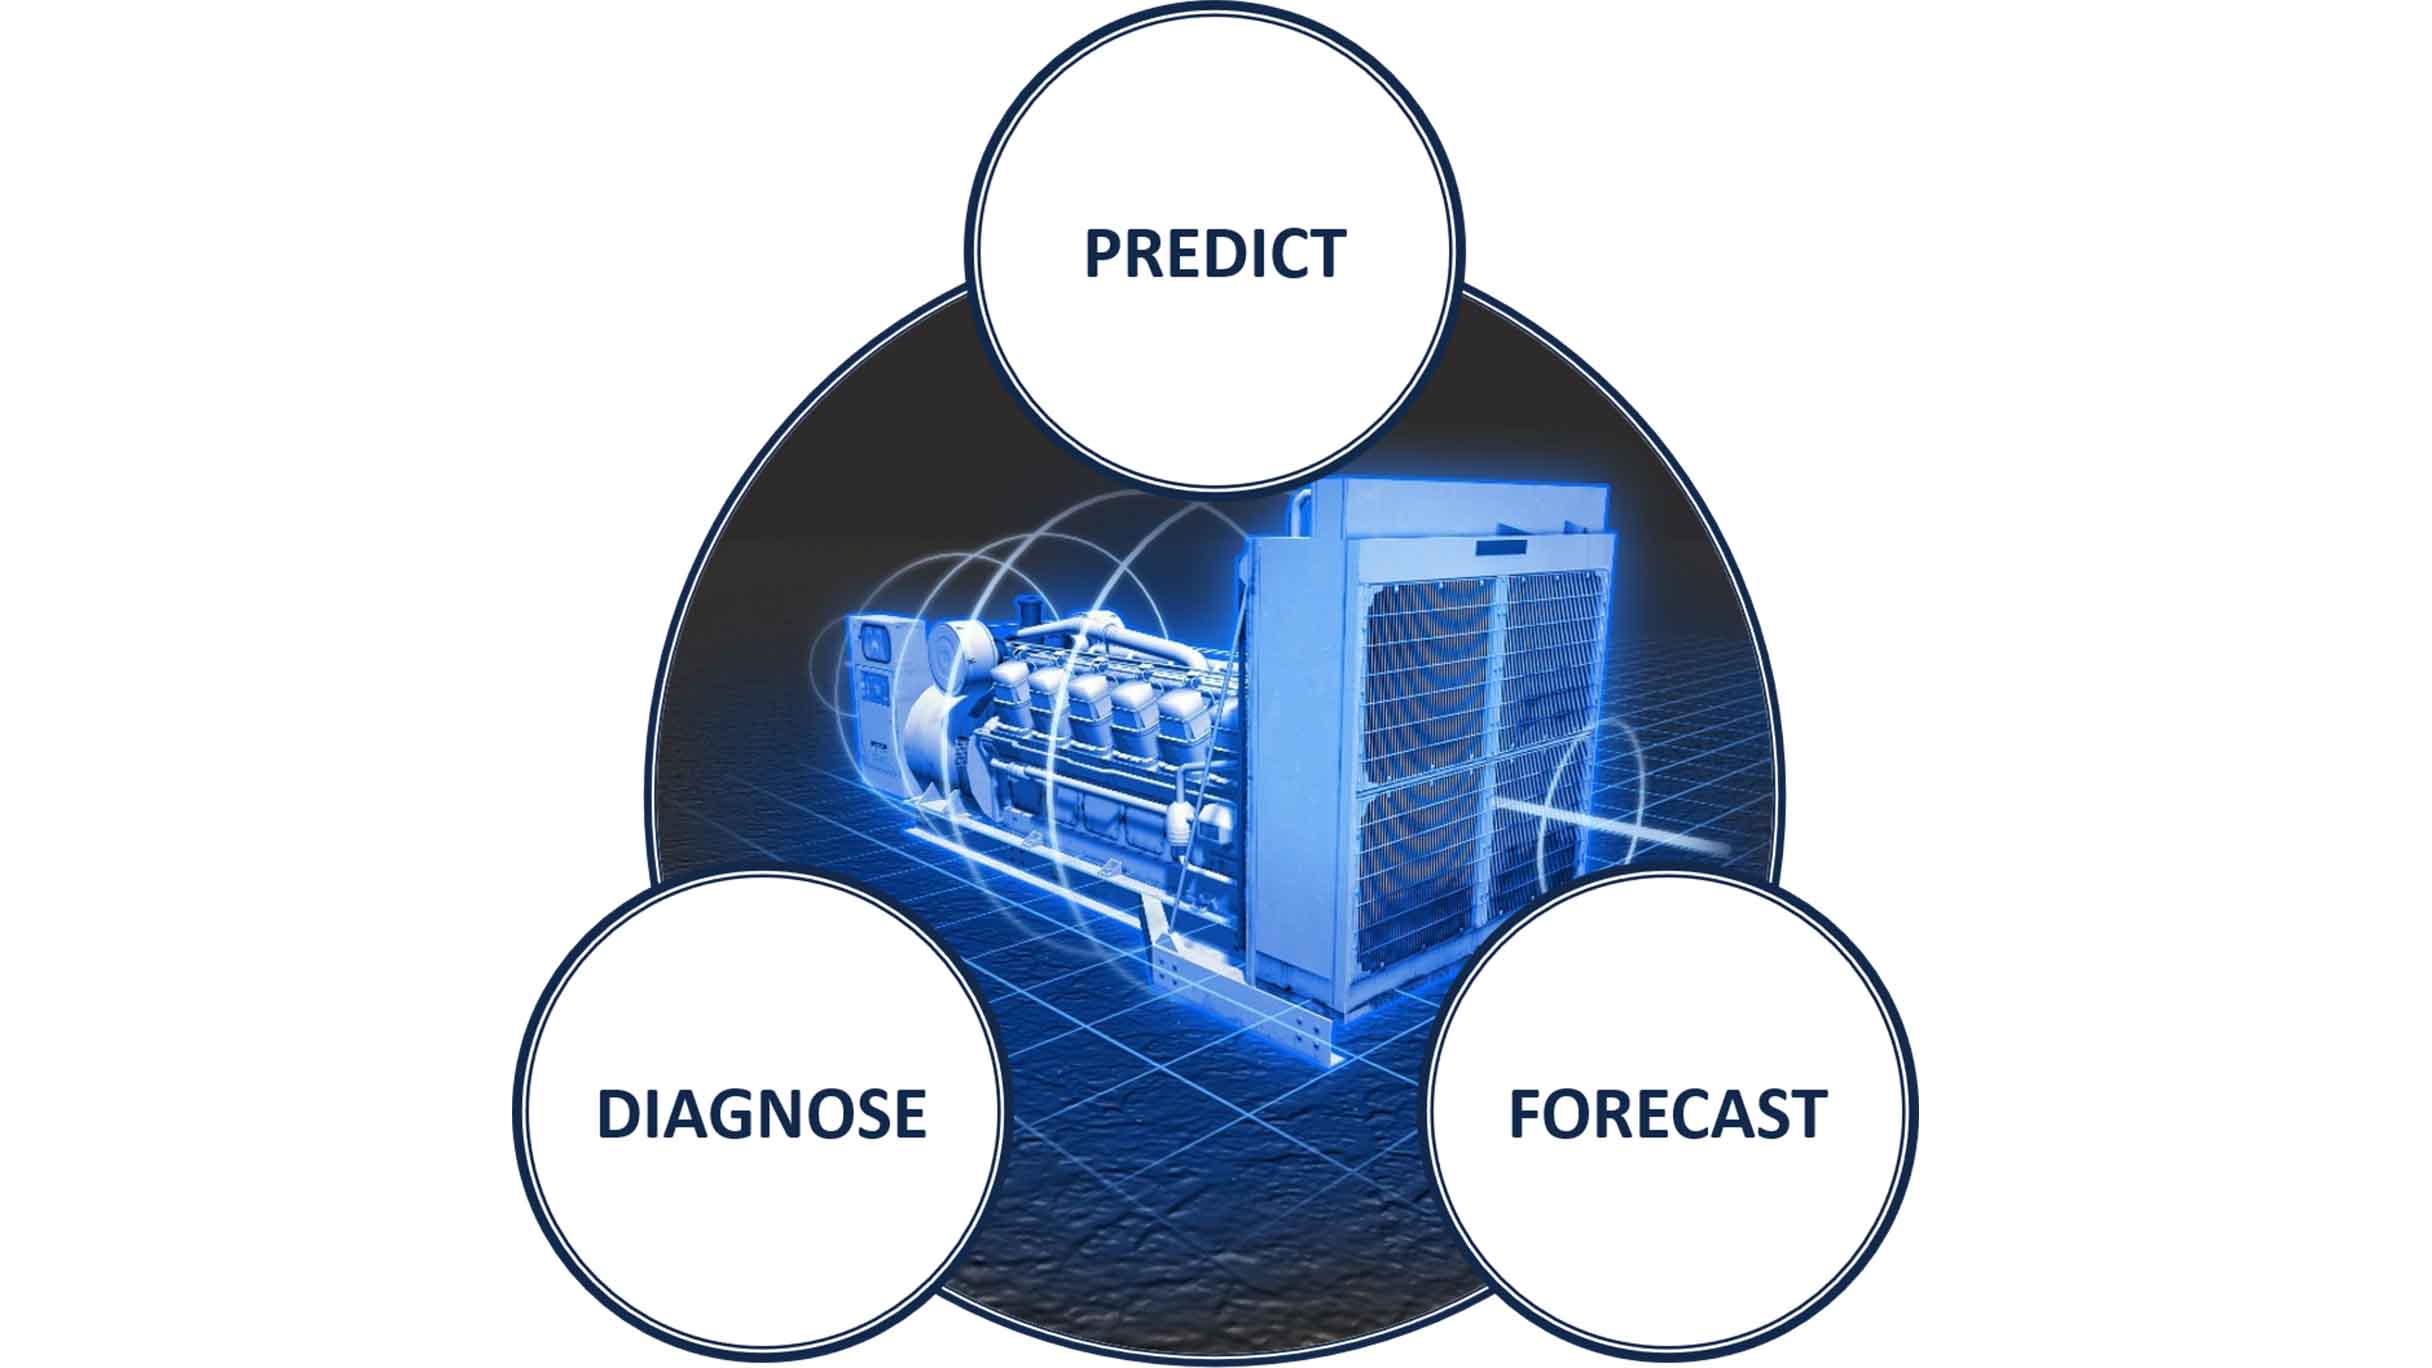 Digital Twin technology helps predict, diagnose and forecast | GE Digital